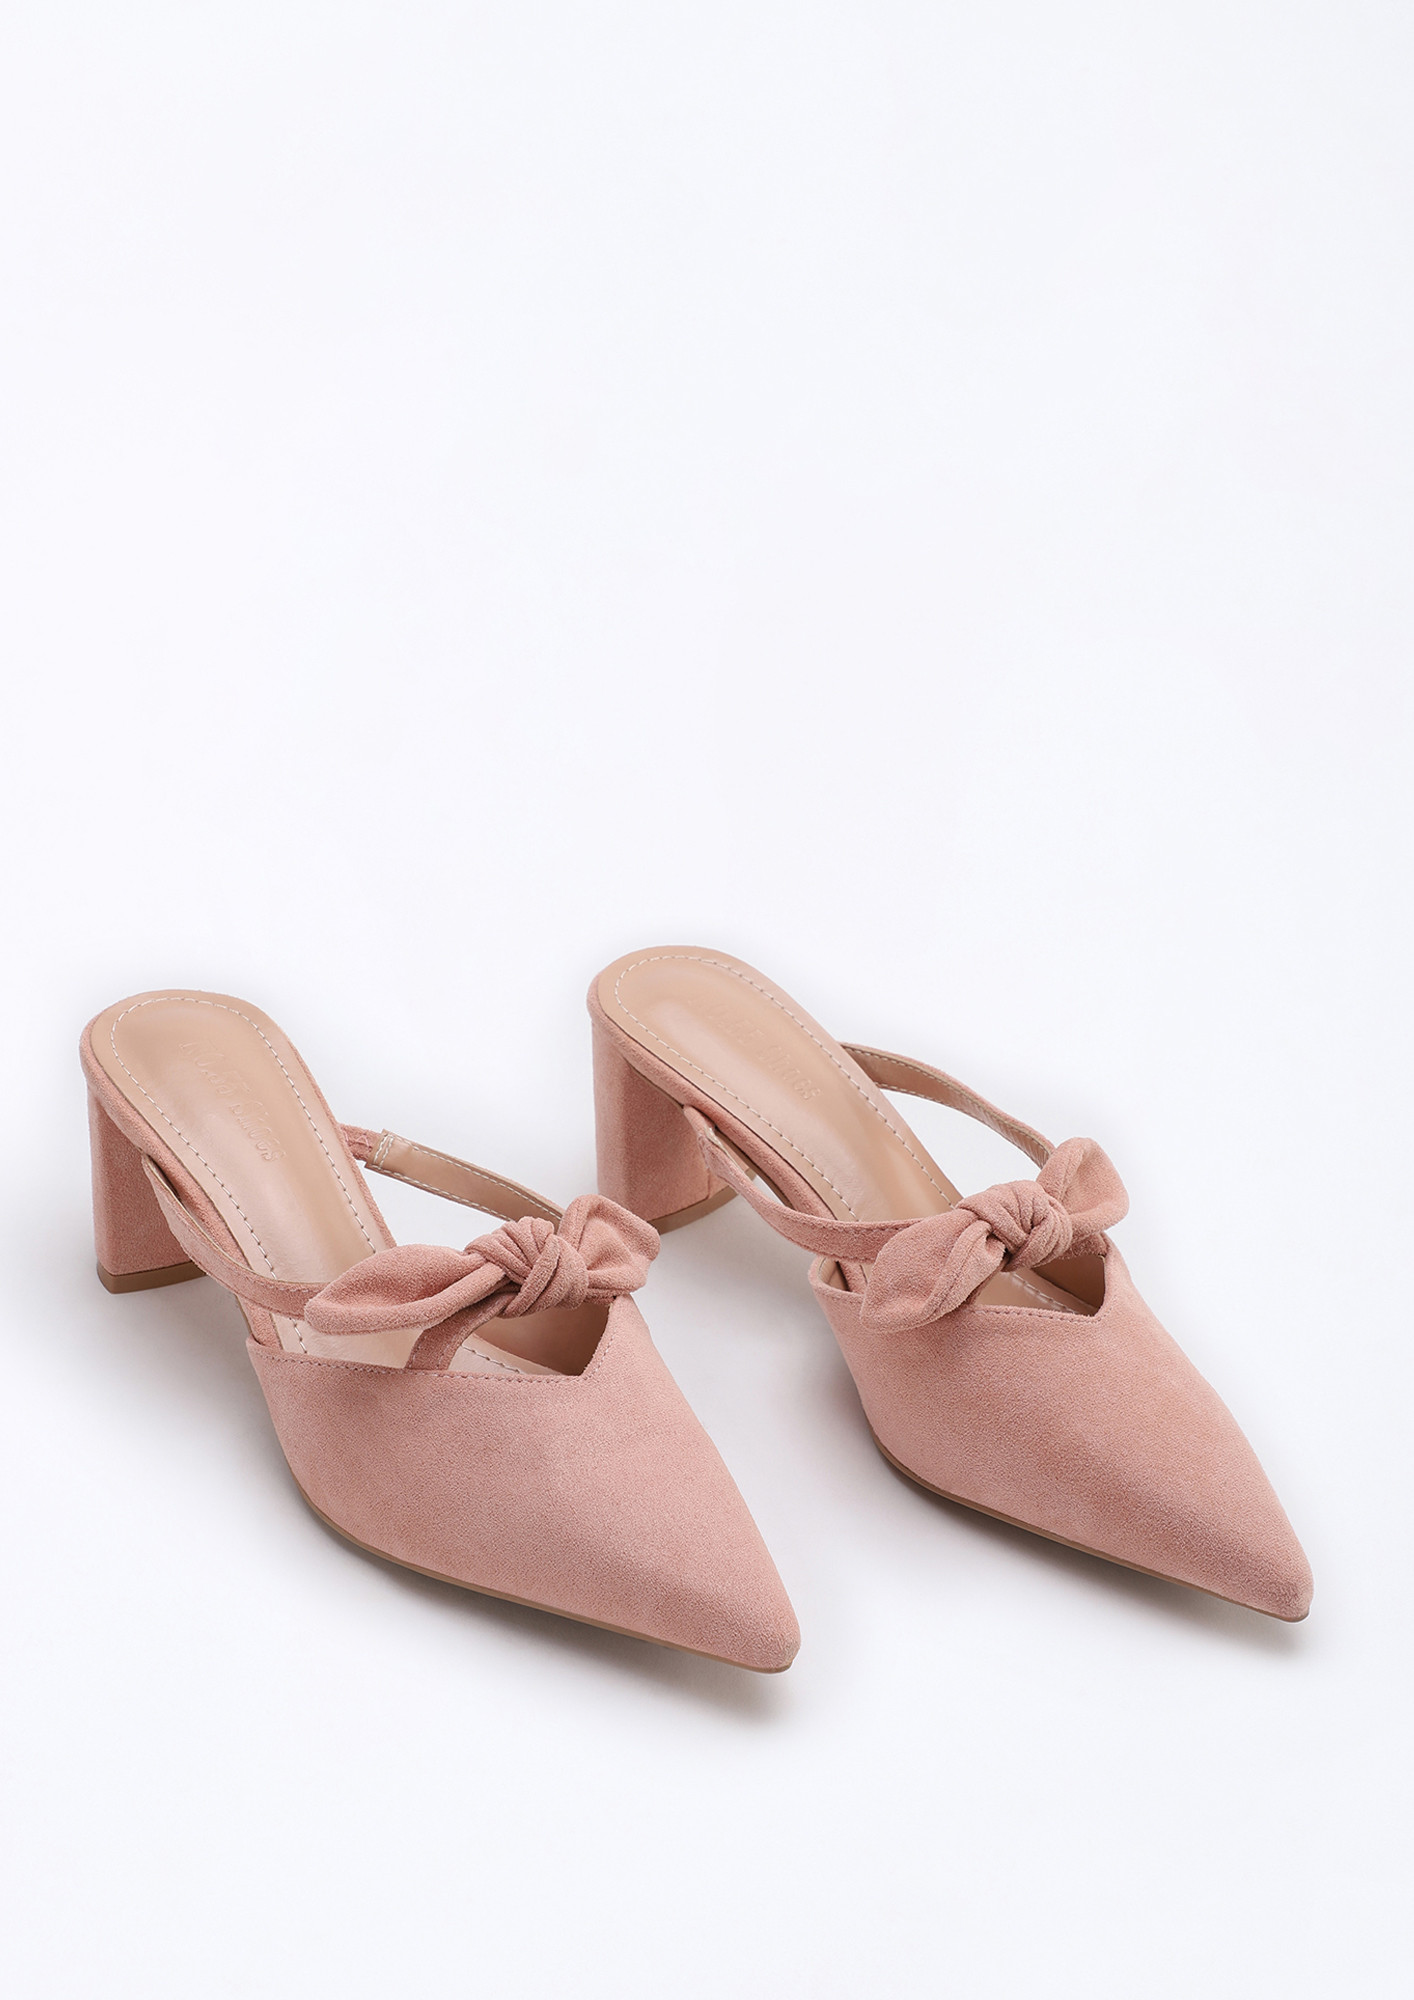 SWEET BOW NUDE PINK BLOCK HEELED PUMPS